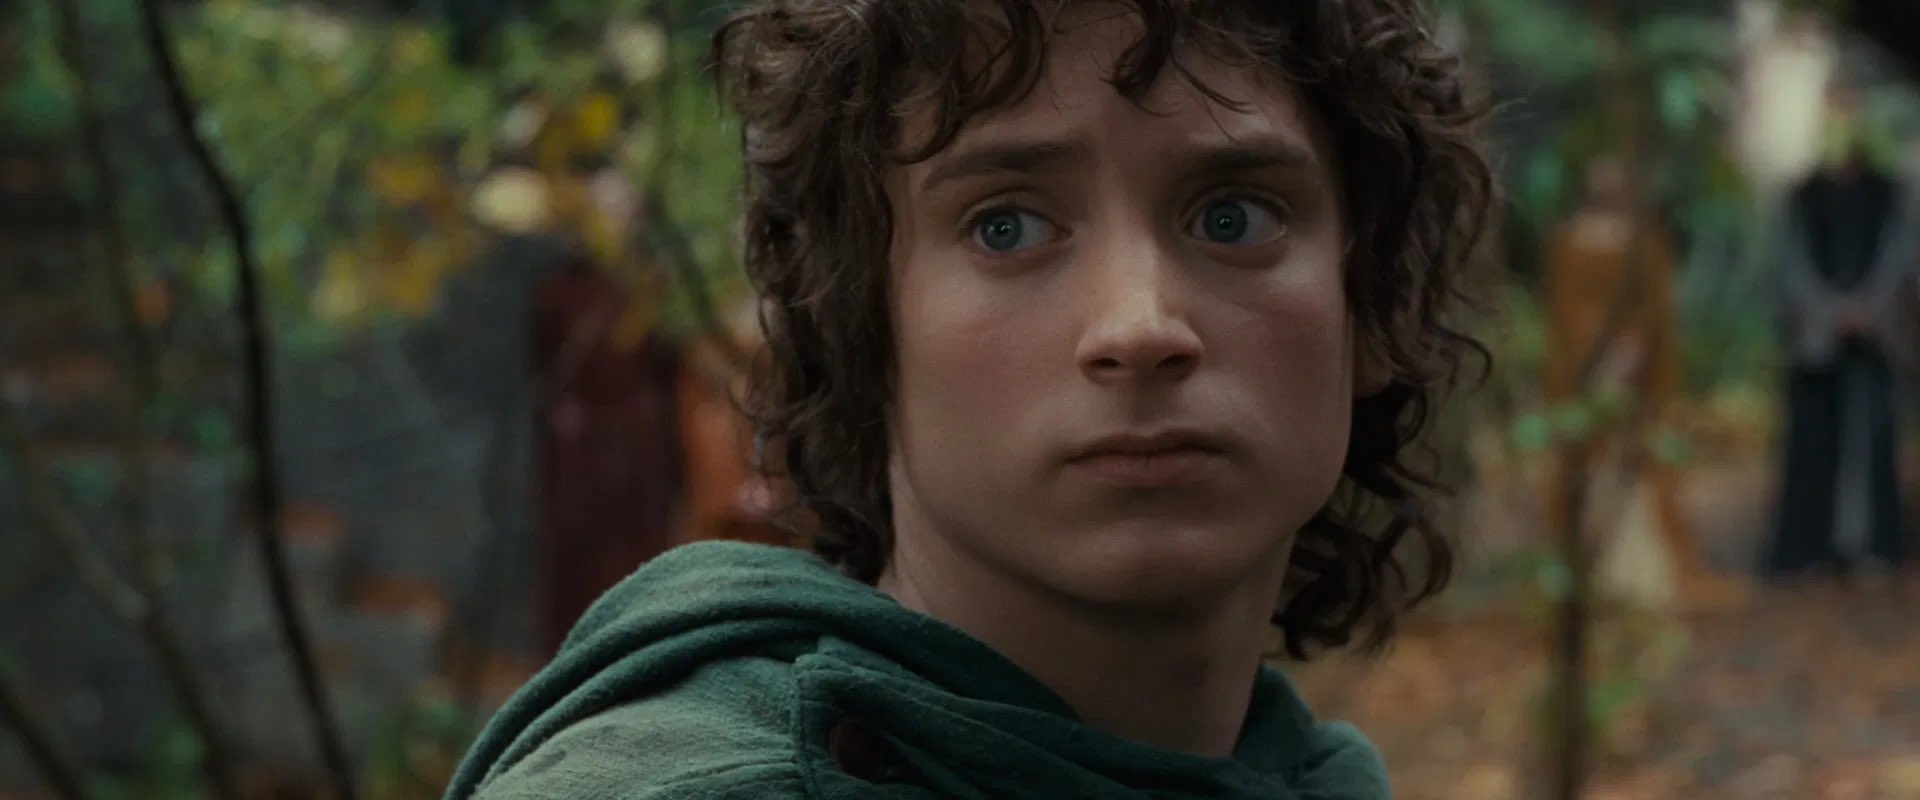 Happy birthday to elijah wood, the best frodo we could ever ask for 